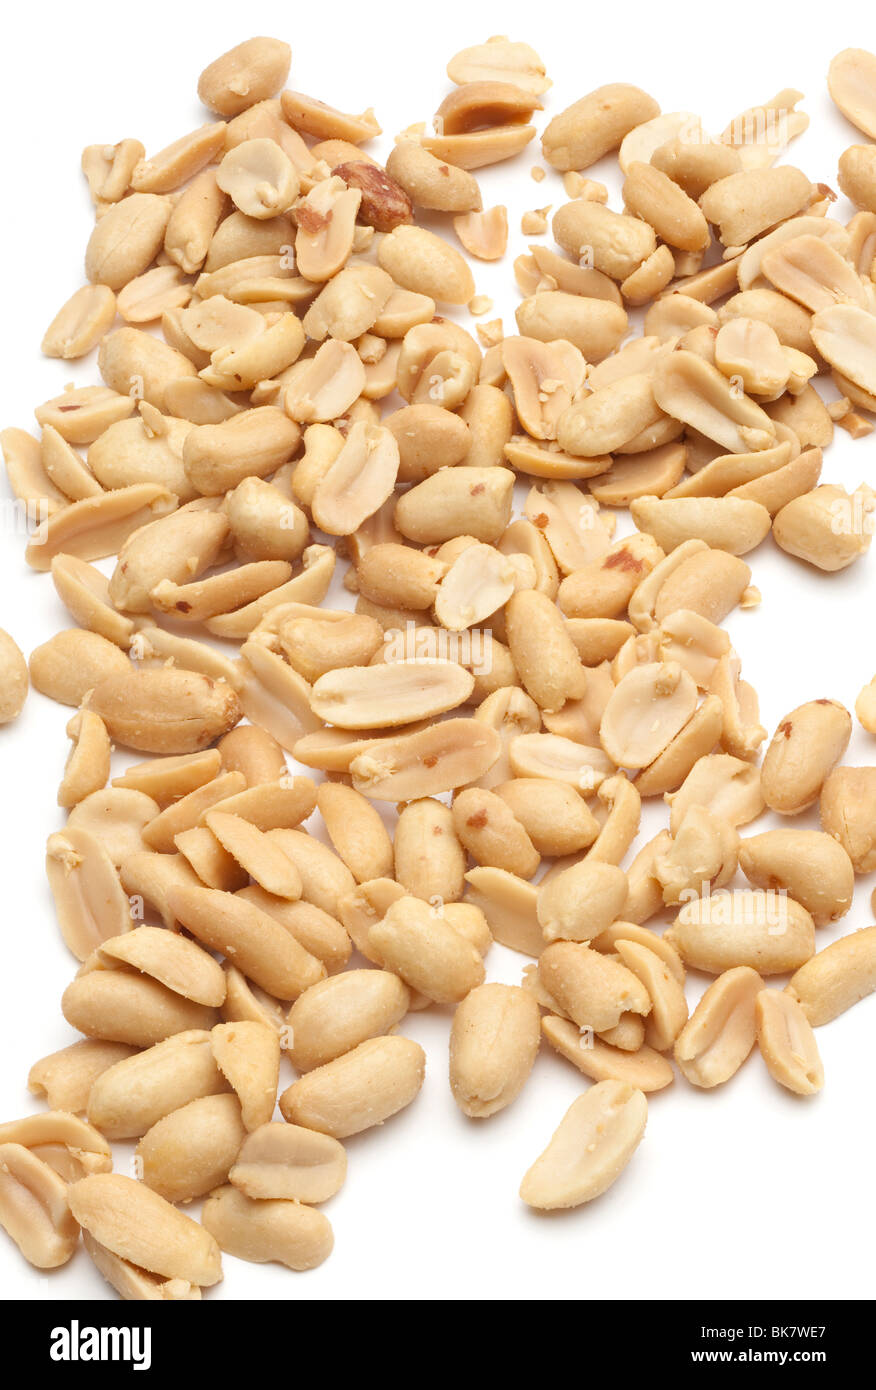 Pile of Salted peanuts Stock Photo